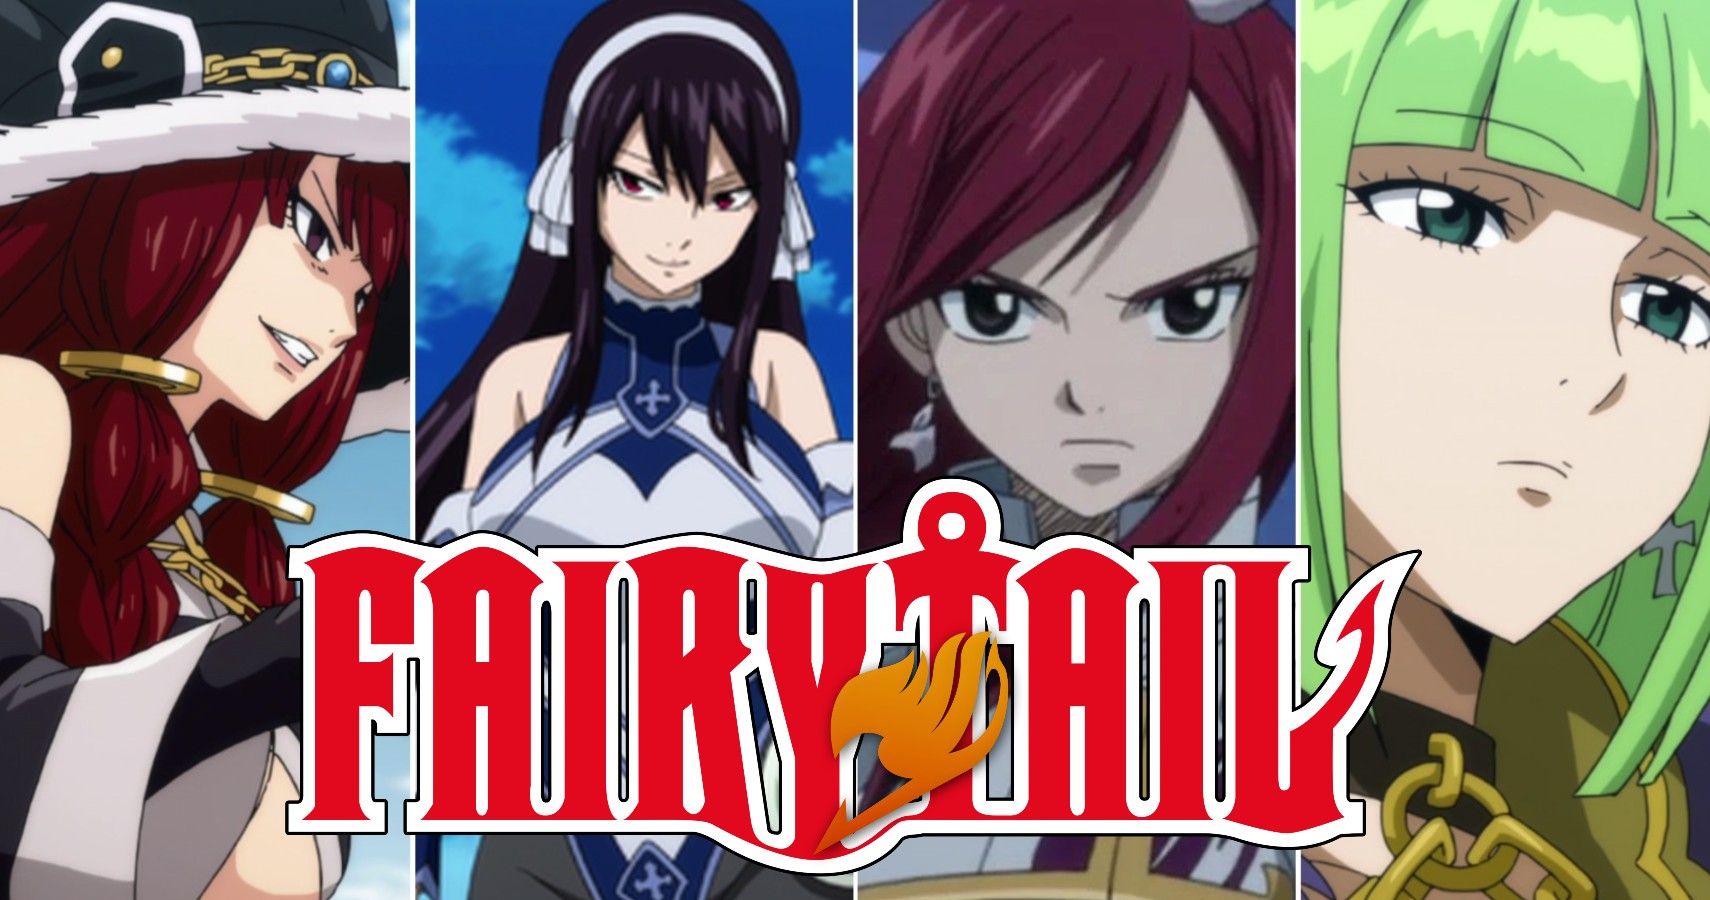 Fairy Tail: 10 Most Powerful Dragon Slayers, Ranked